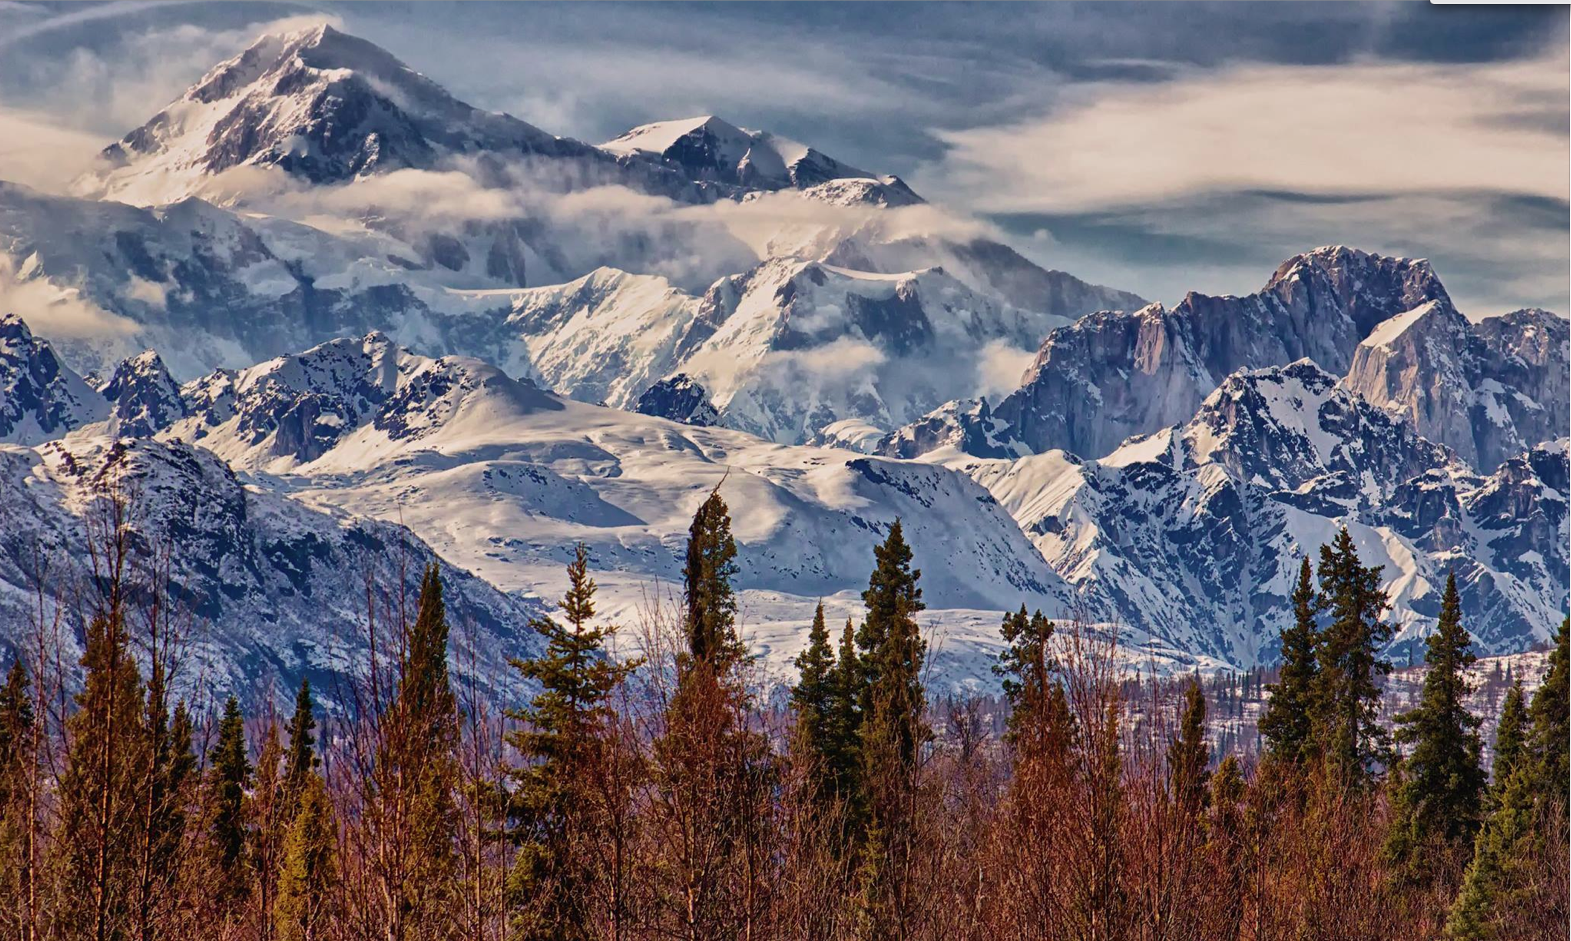 A view of Denali, the tallest mountain in North America and surrounding mountain range.